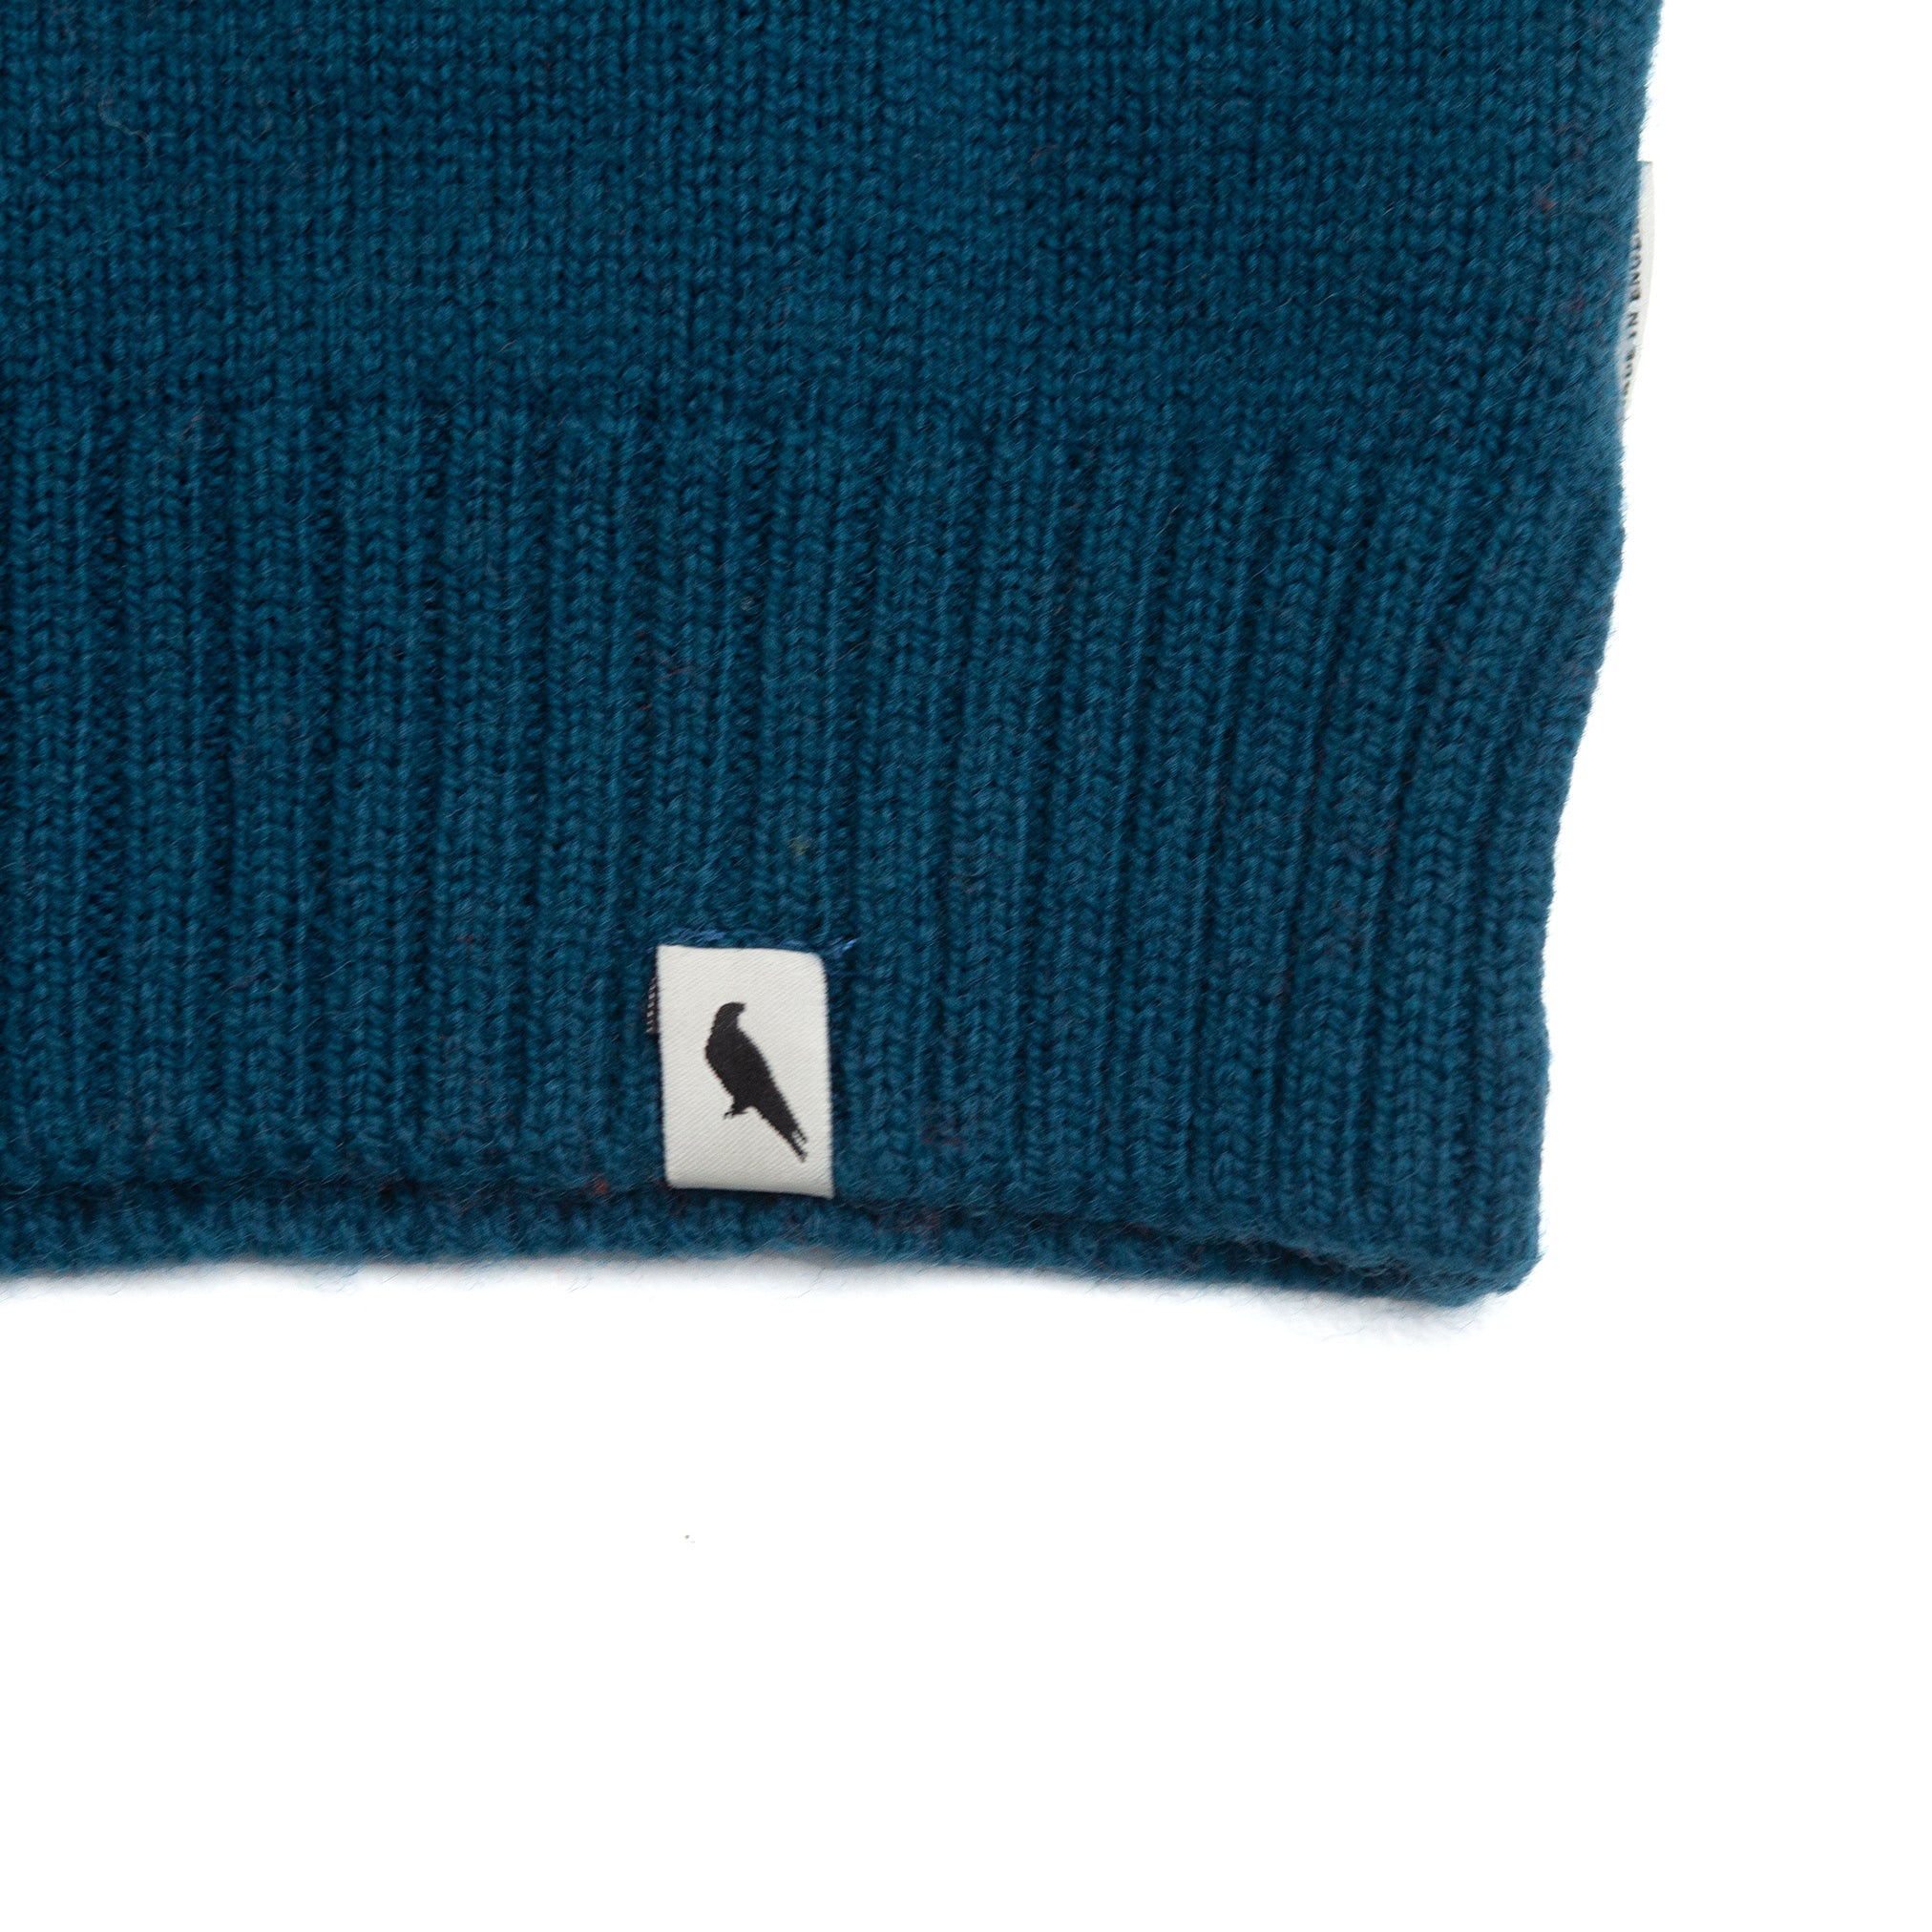 Makers Stitch Sweater in Teal